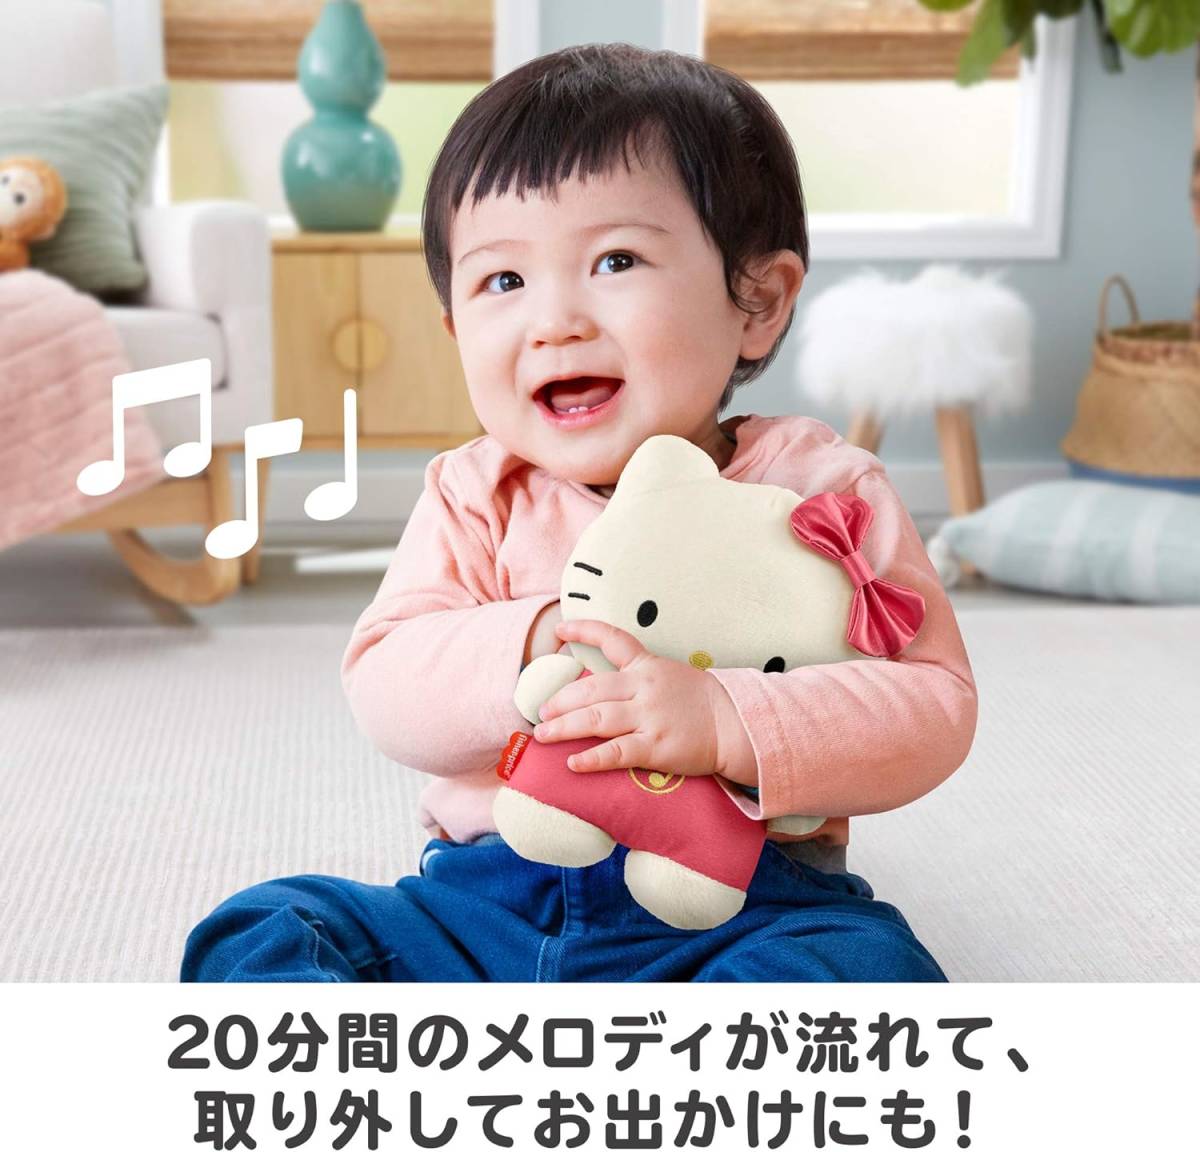  new goods unused * free shipping Fischer price fisher price Sanrio baby musical * Deluxe Jim 0ka month from intellectual training toy GXC10